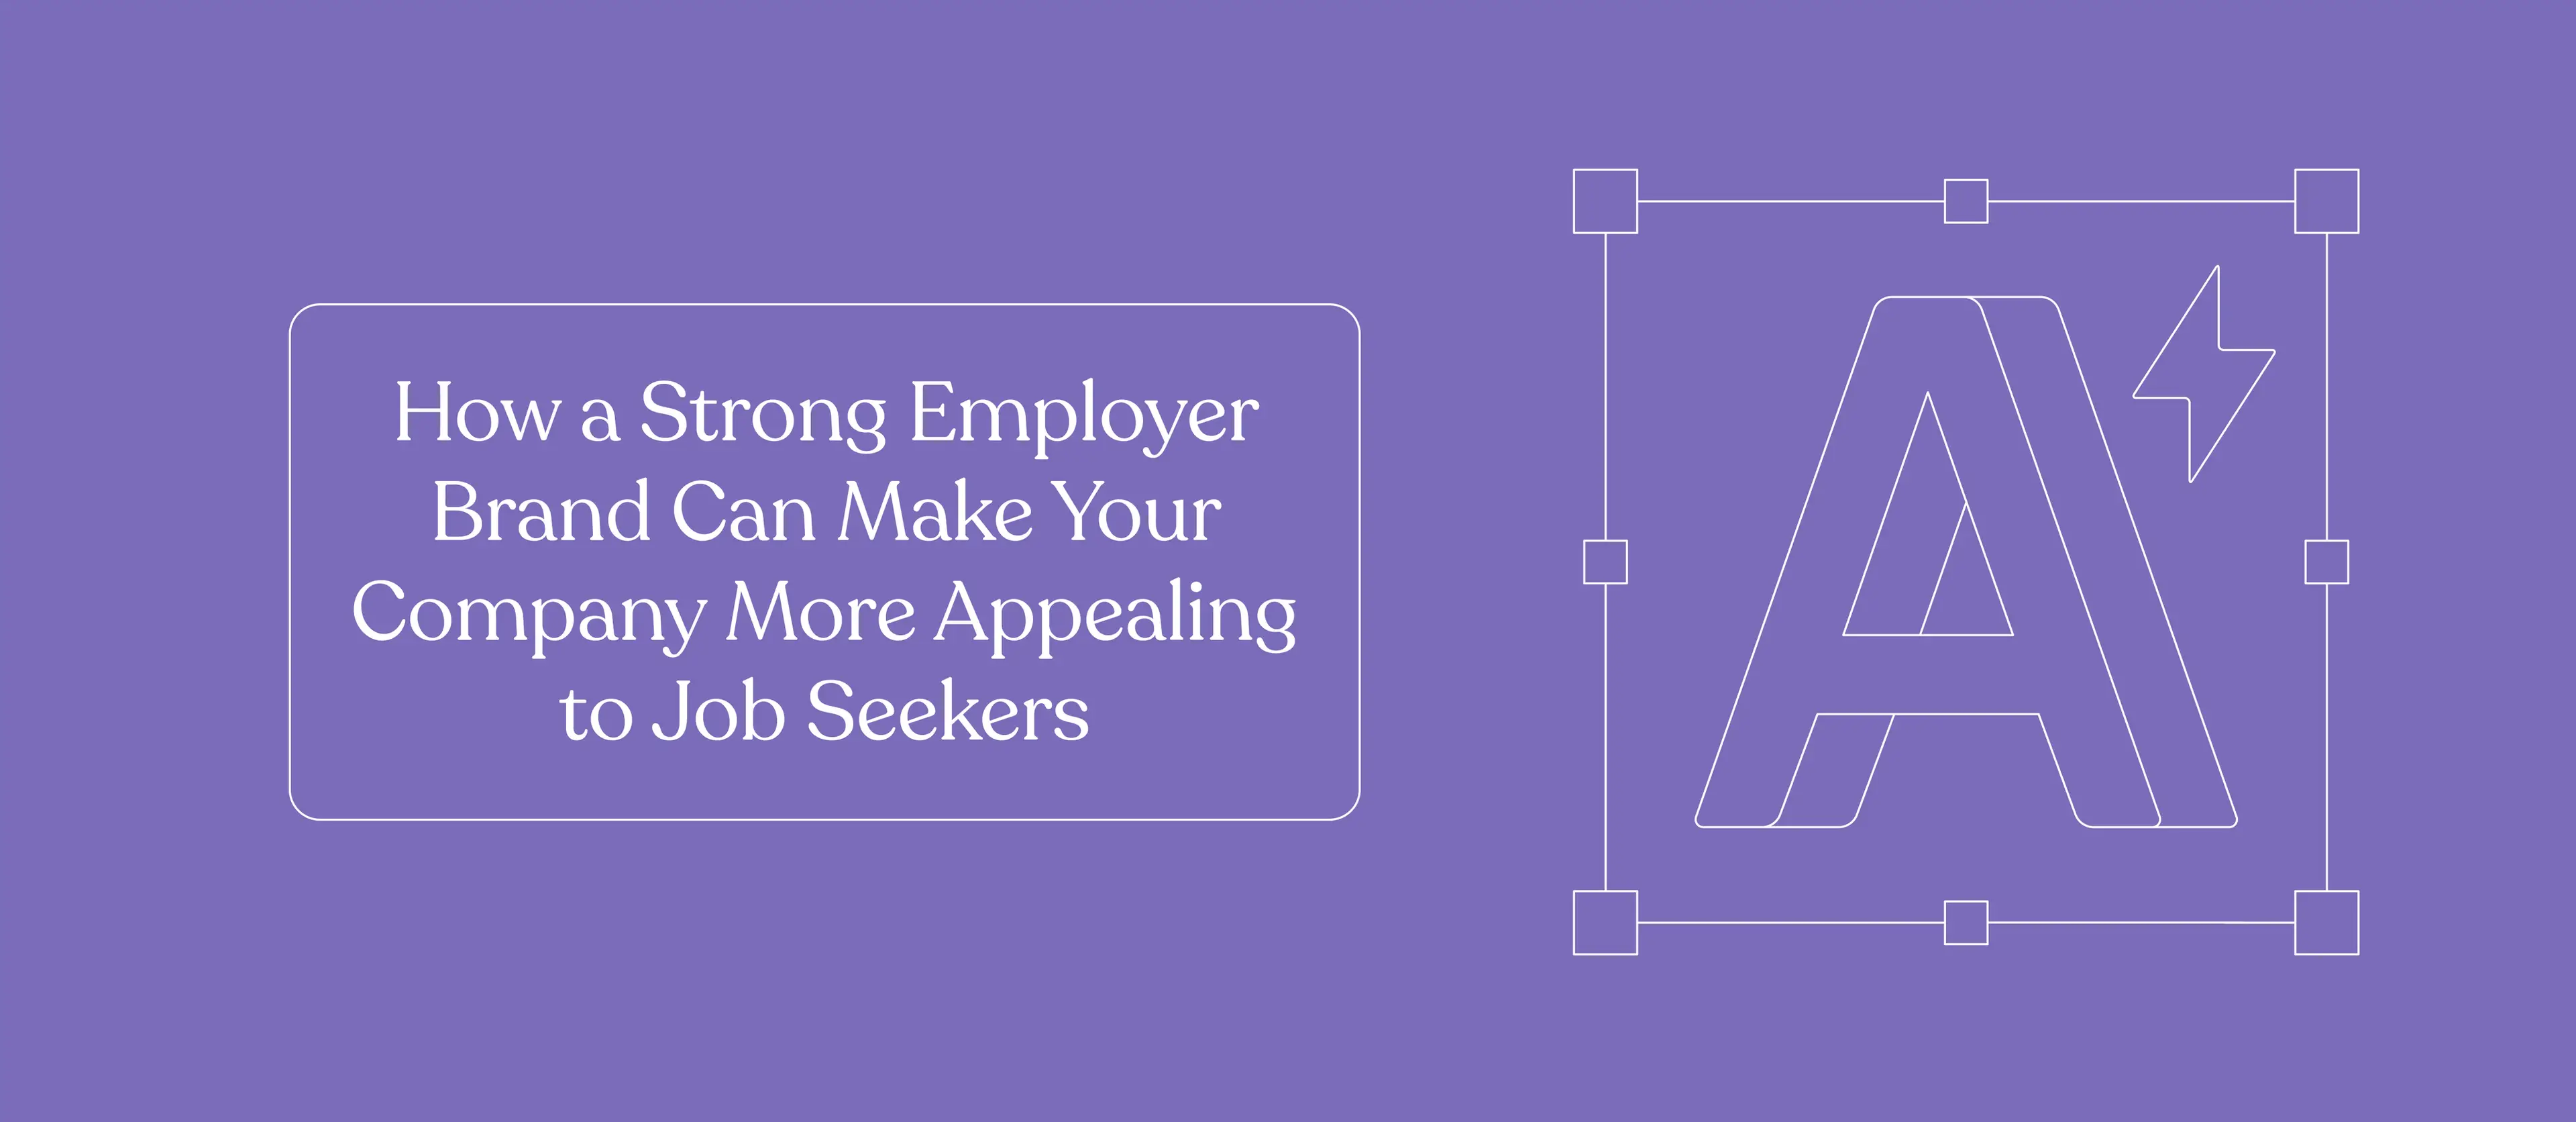 Purple graphic with title:  "How a Strong Employer Brand Can Make Your Company More Appealing to Job Seekers"